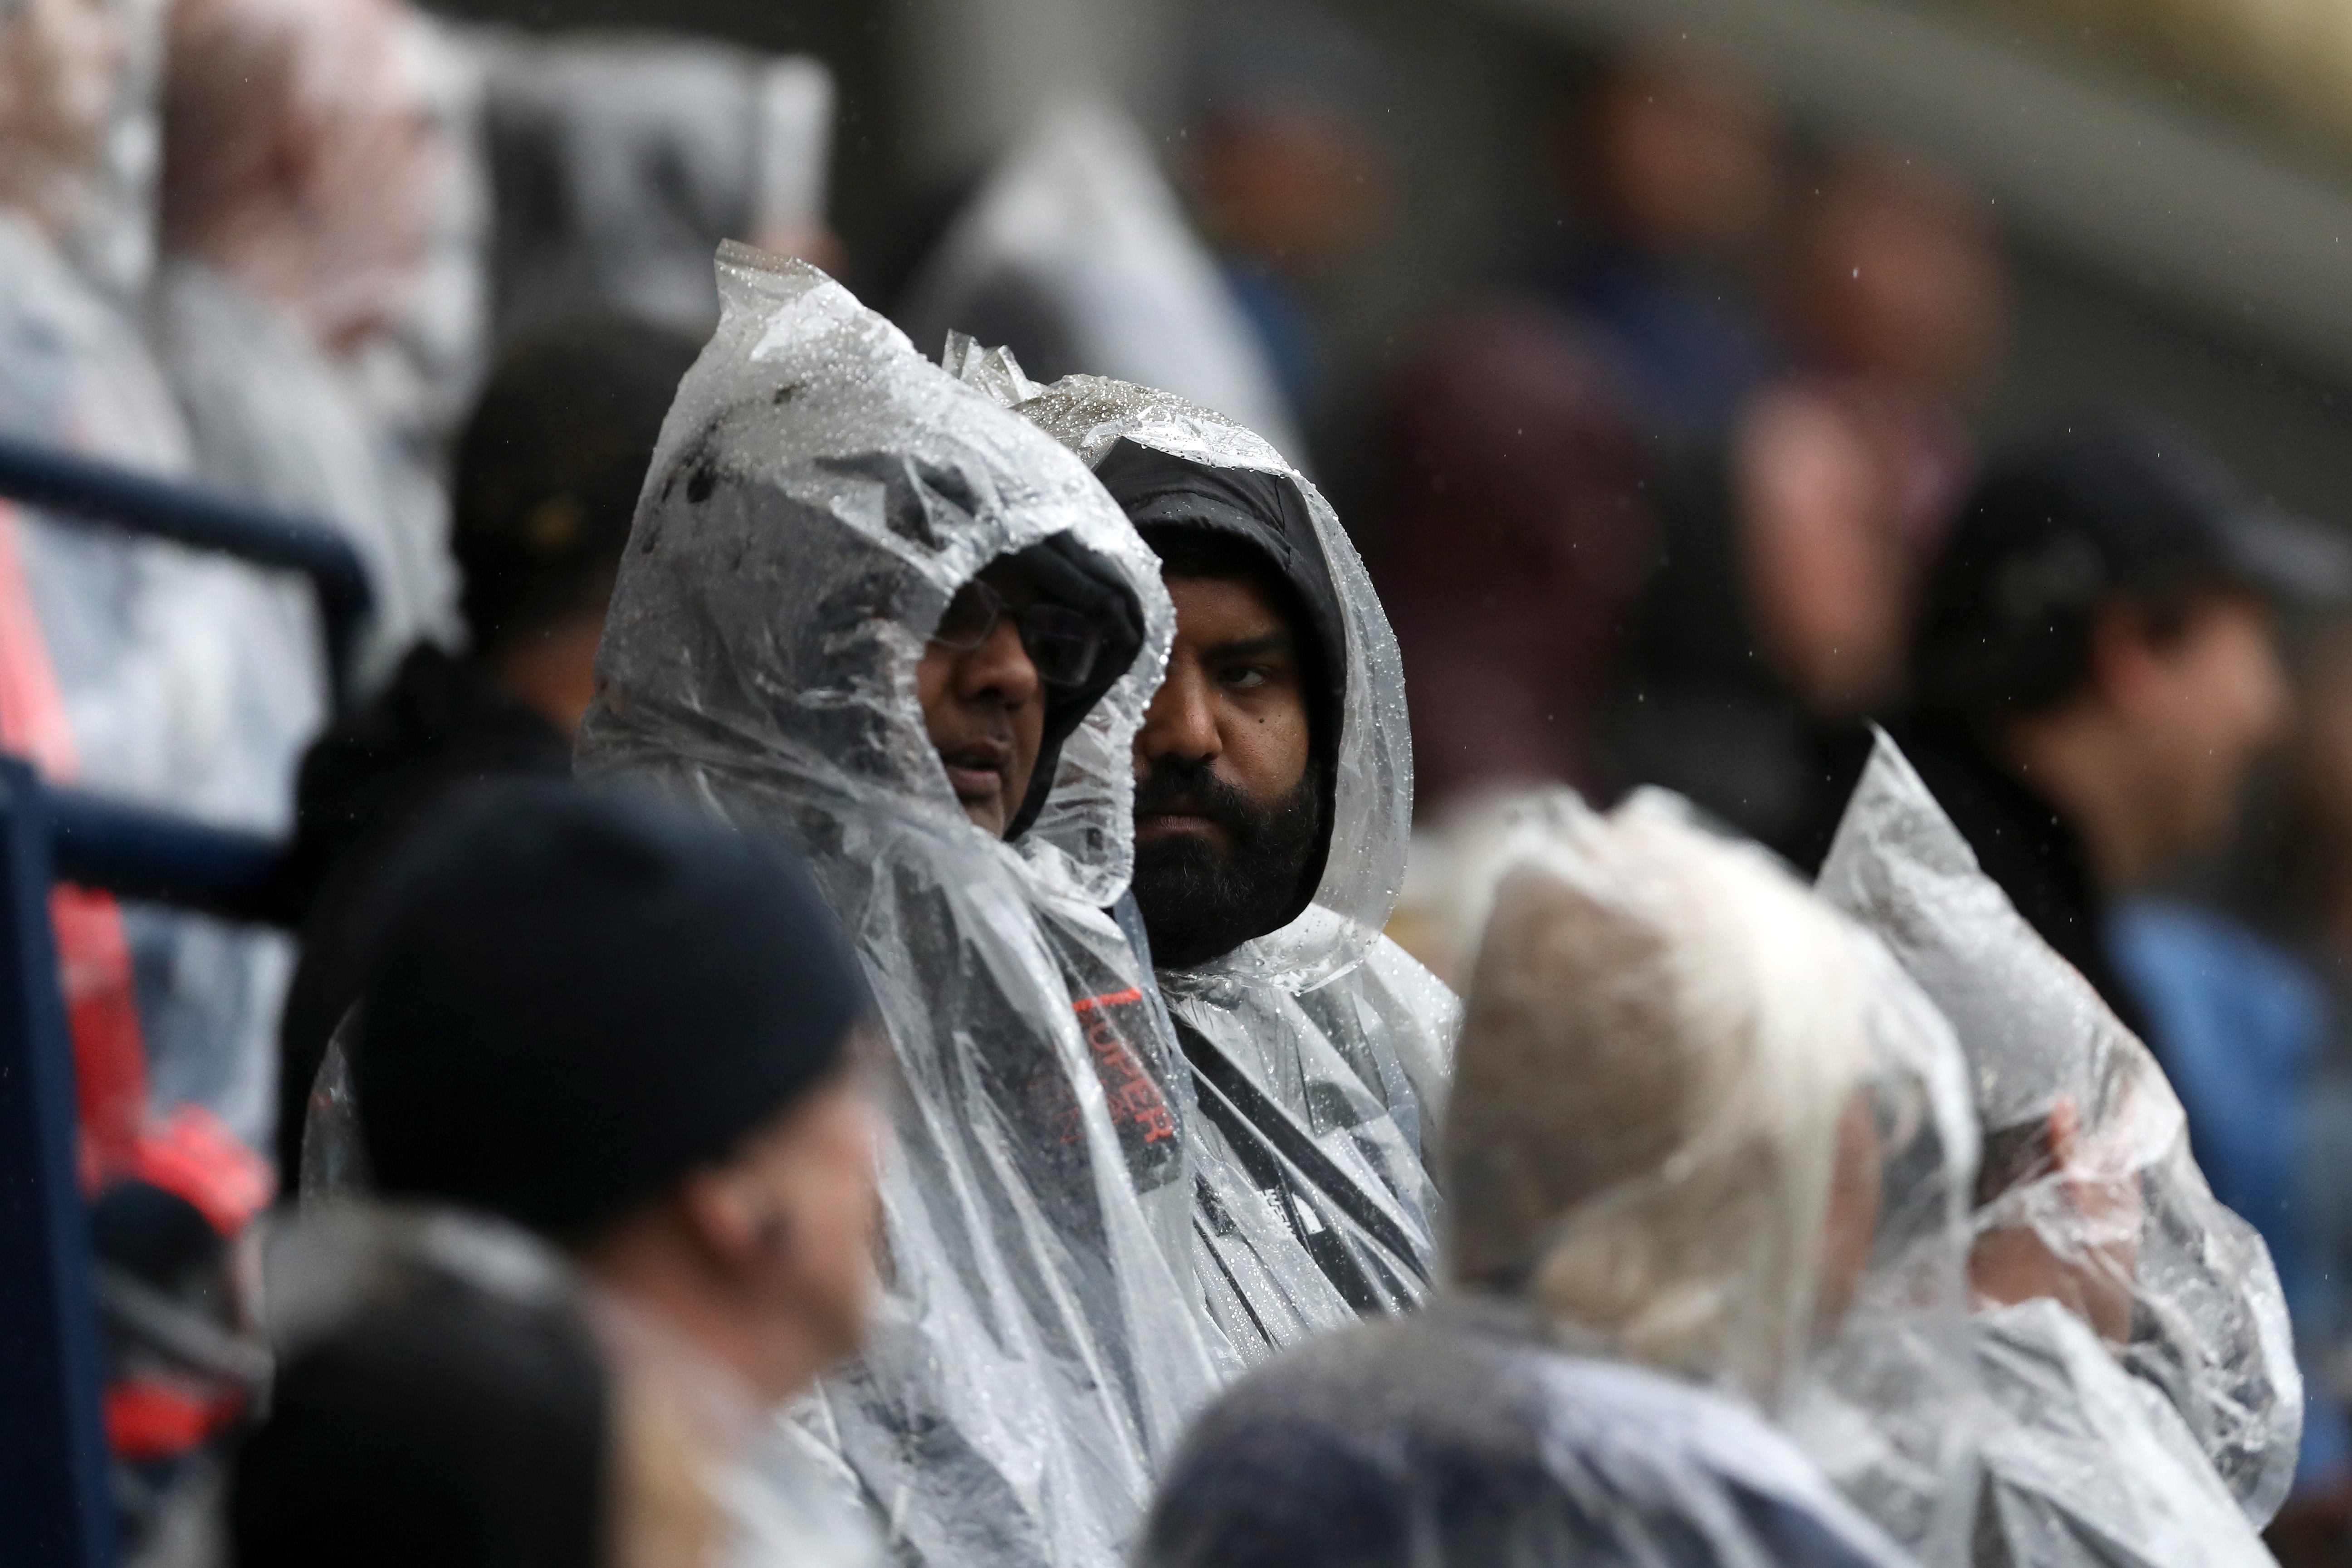 Two Albion fans stood in raincoats